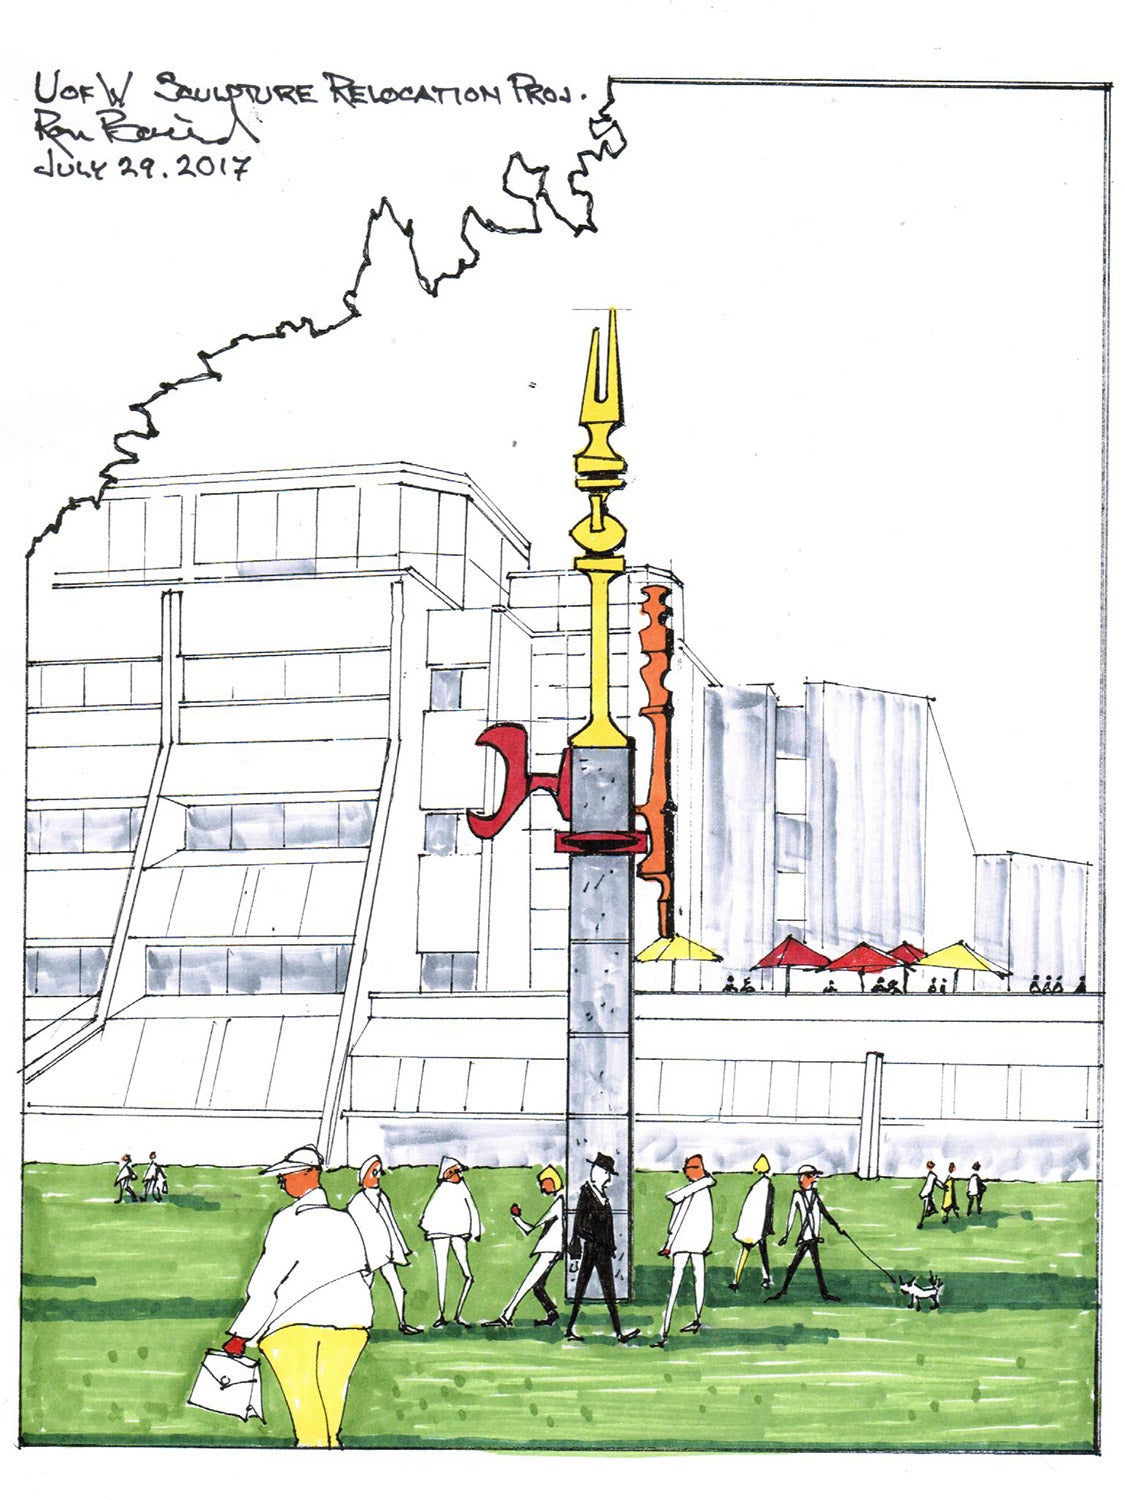 Artists rendering of the sculpture and base.